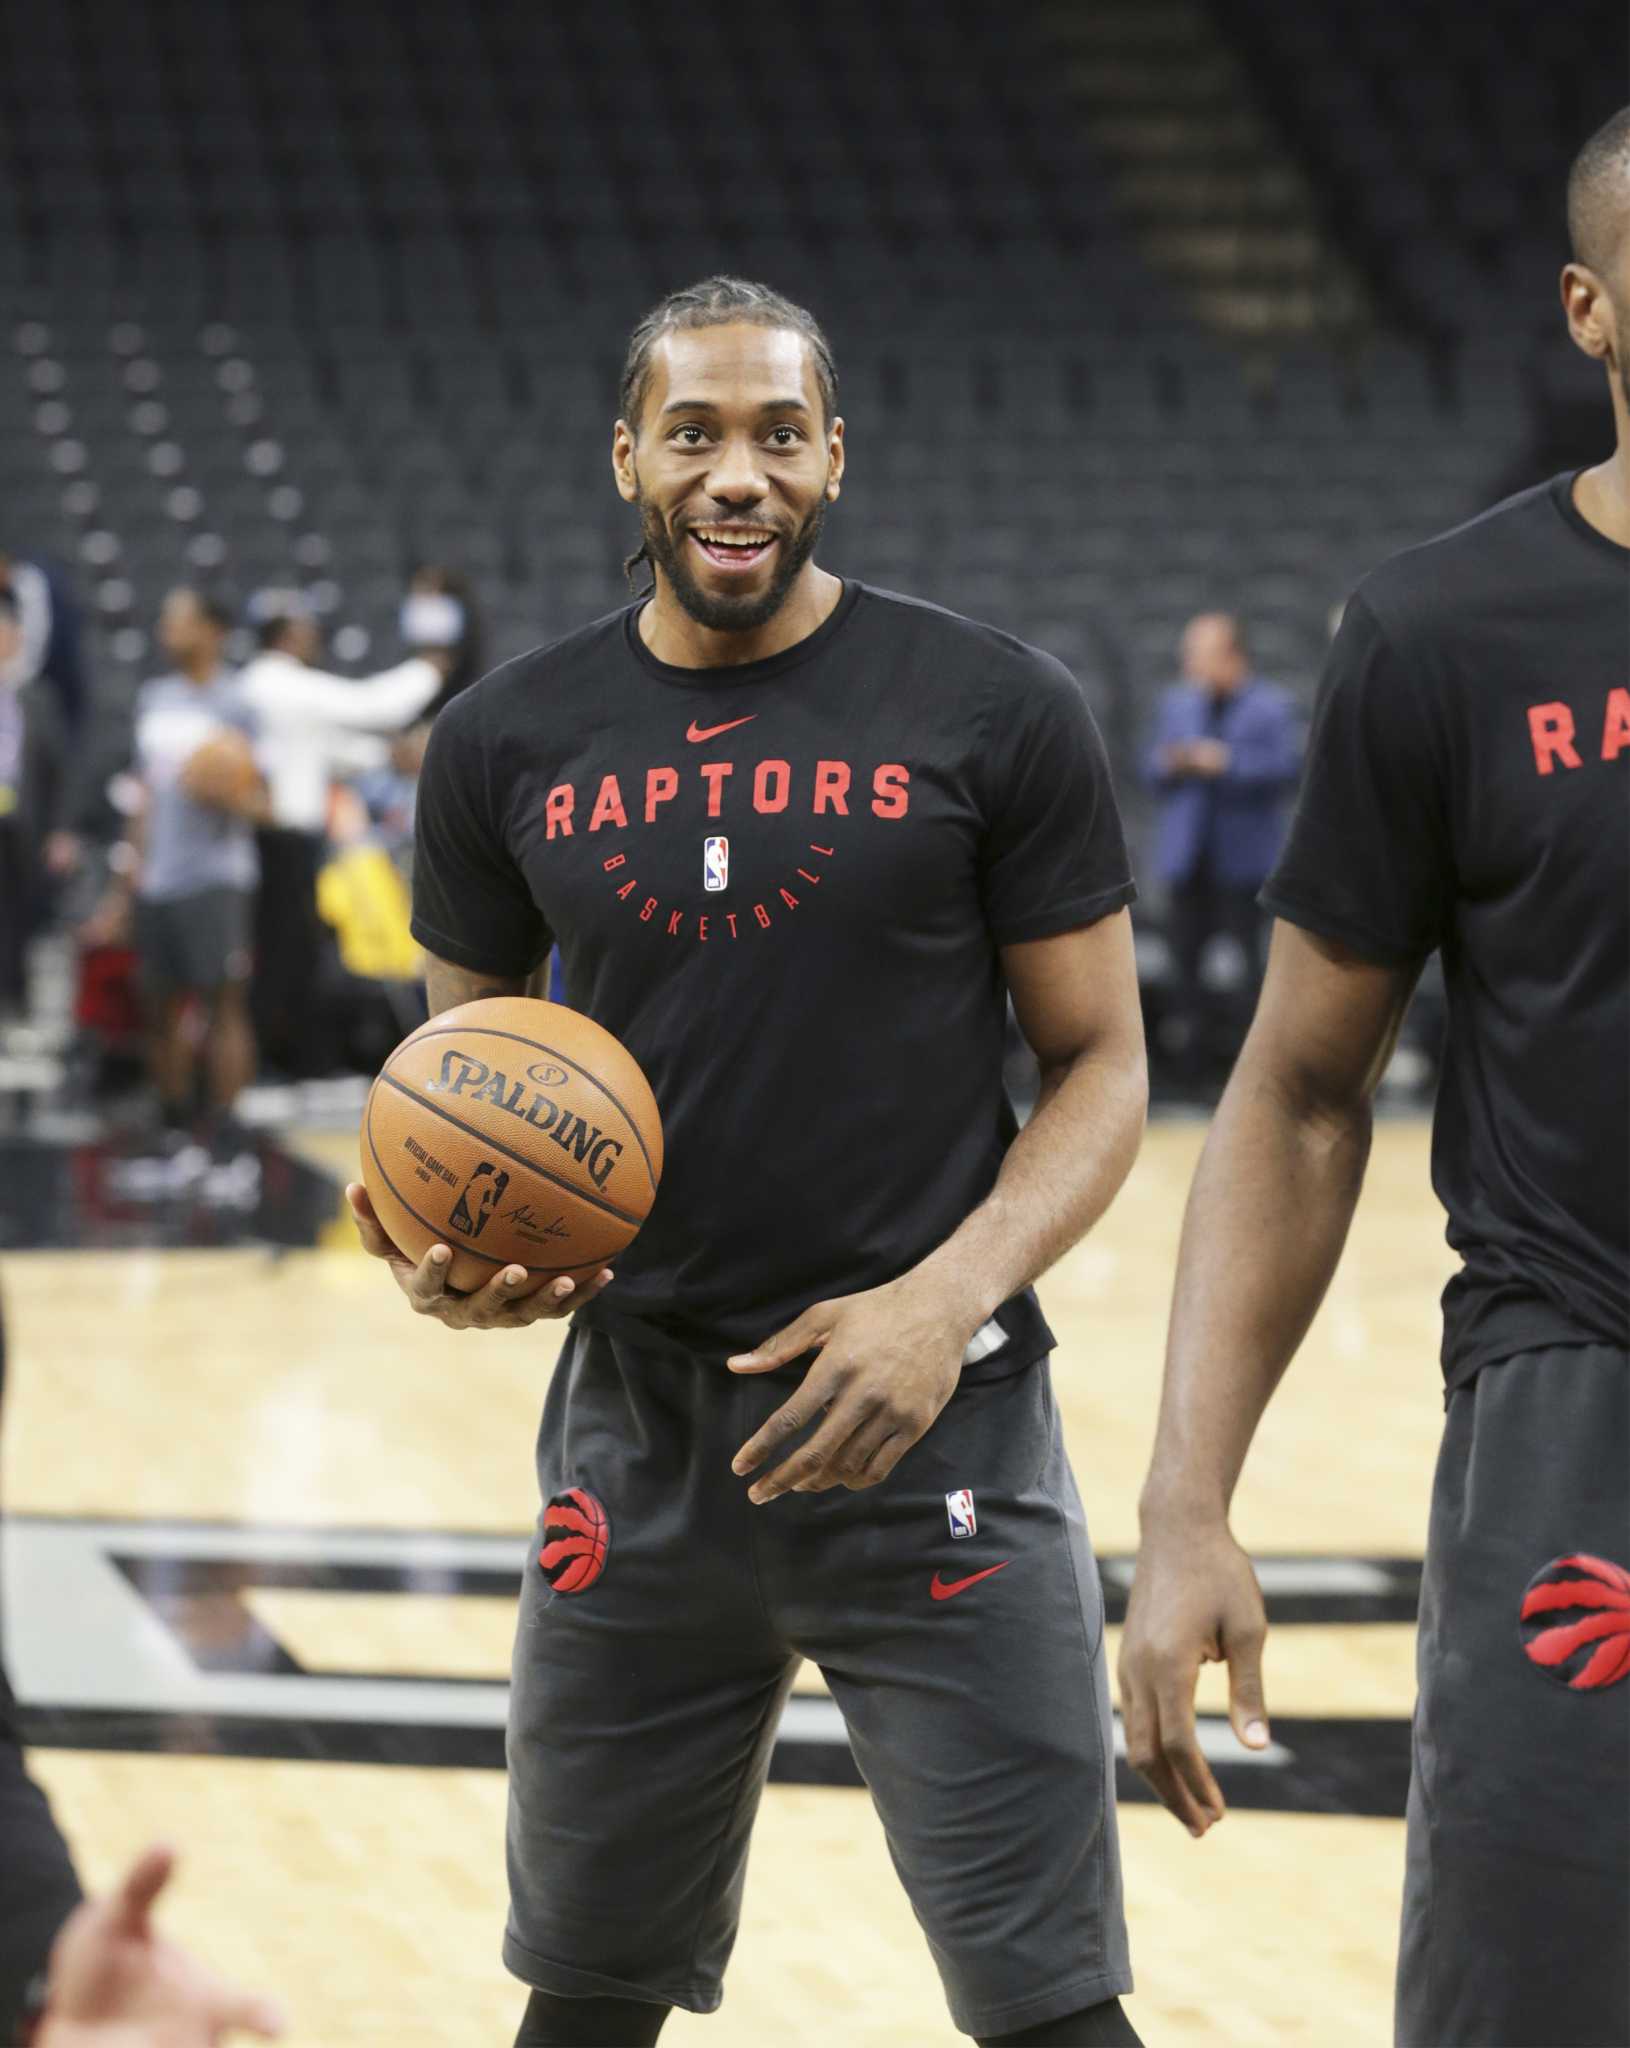 Kawhi Leonard arrives to critical Game 4 dressed in Spurs warmup